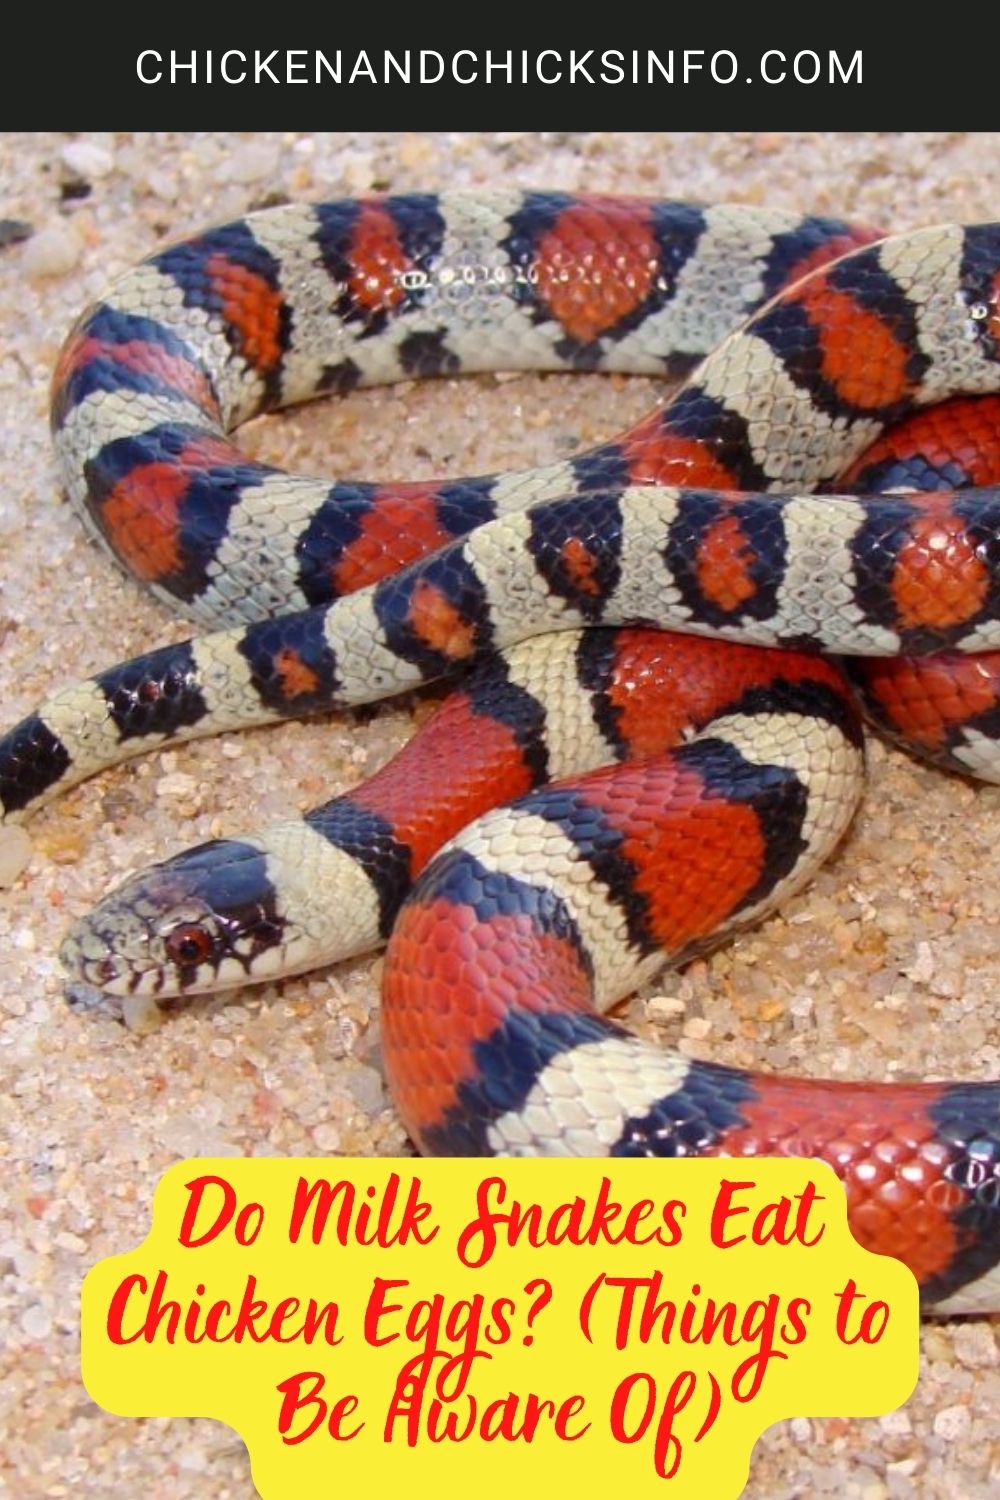 Do Milk Snakes Eat Chicken Eggs? (Things to Be Aware Of) poster.
